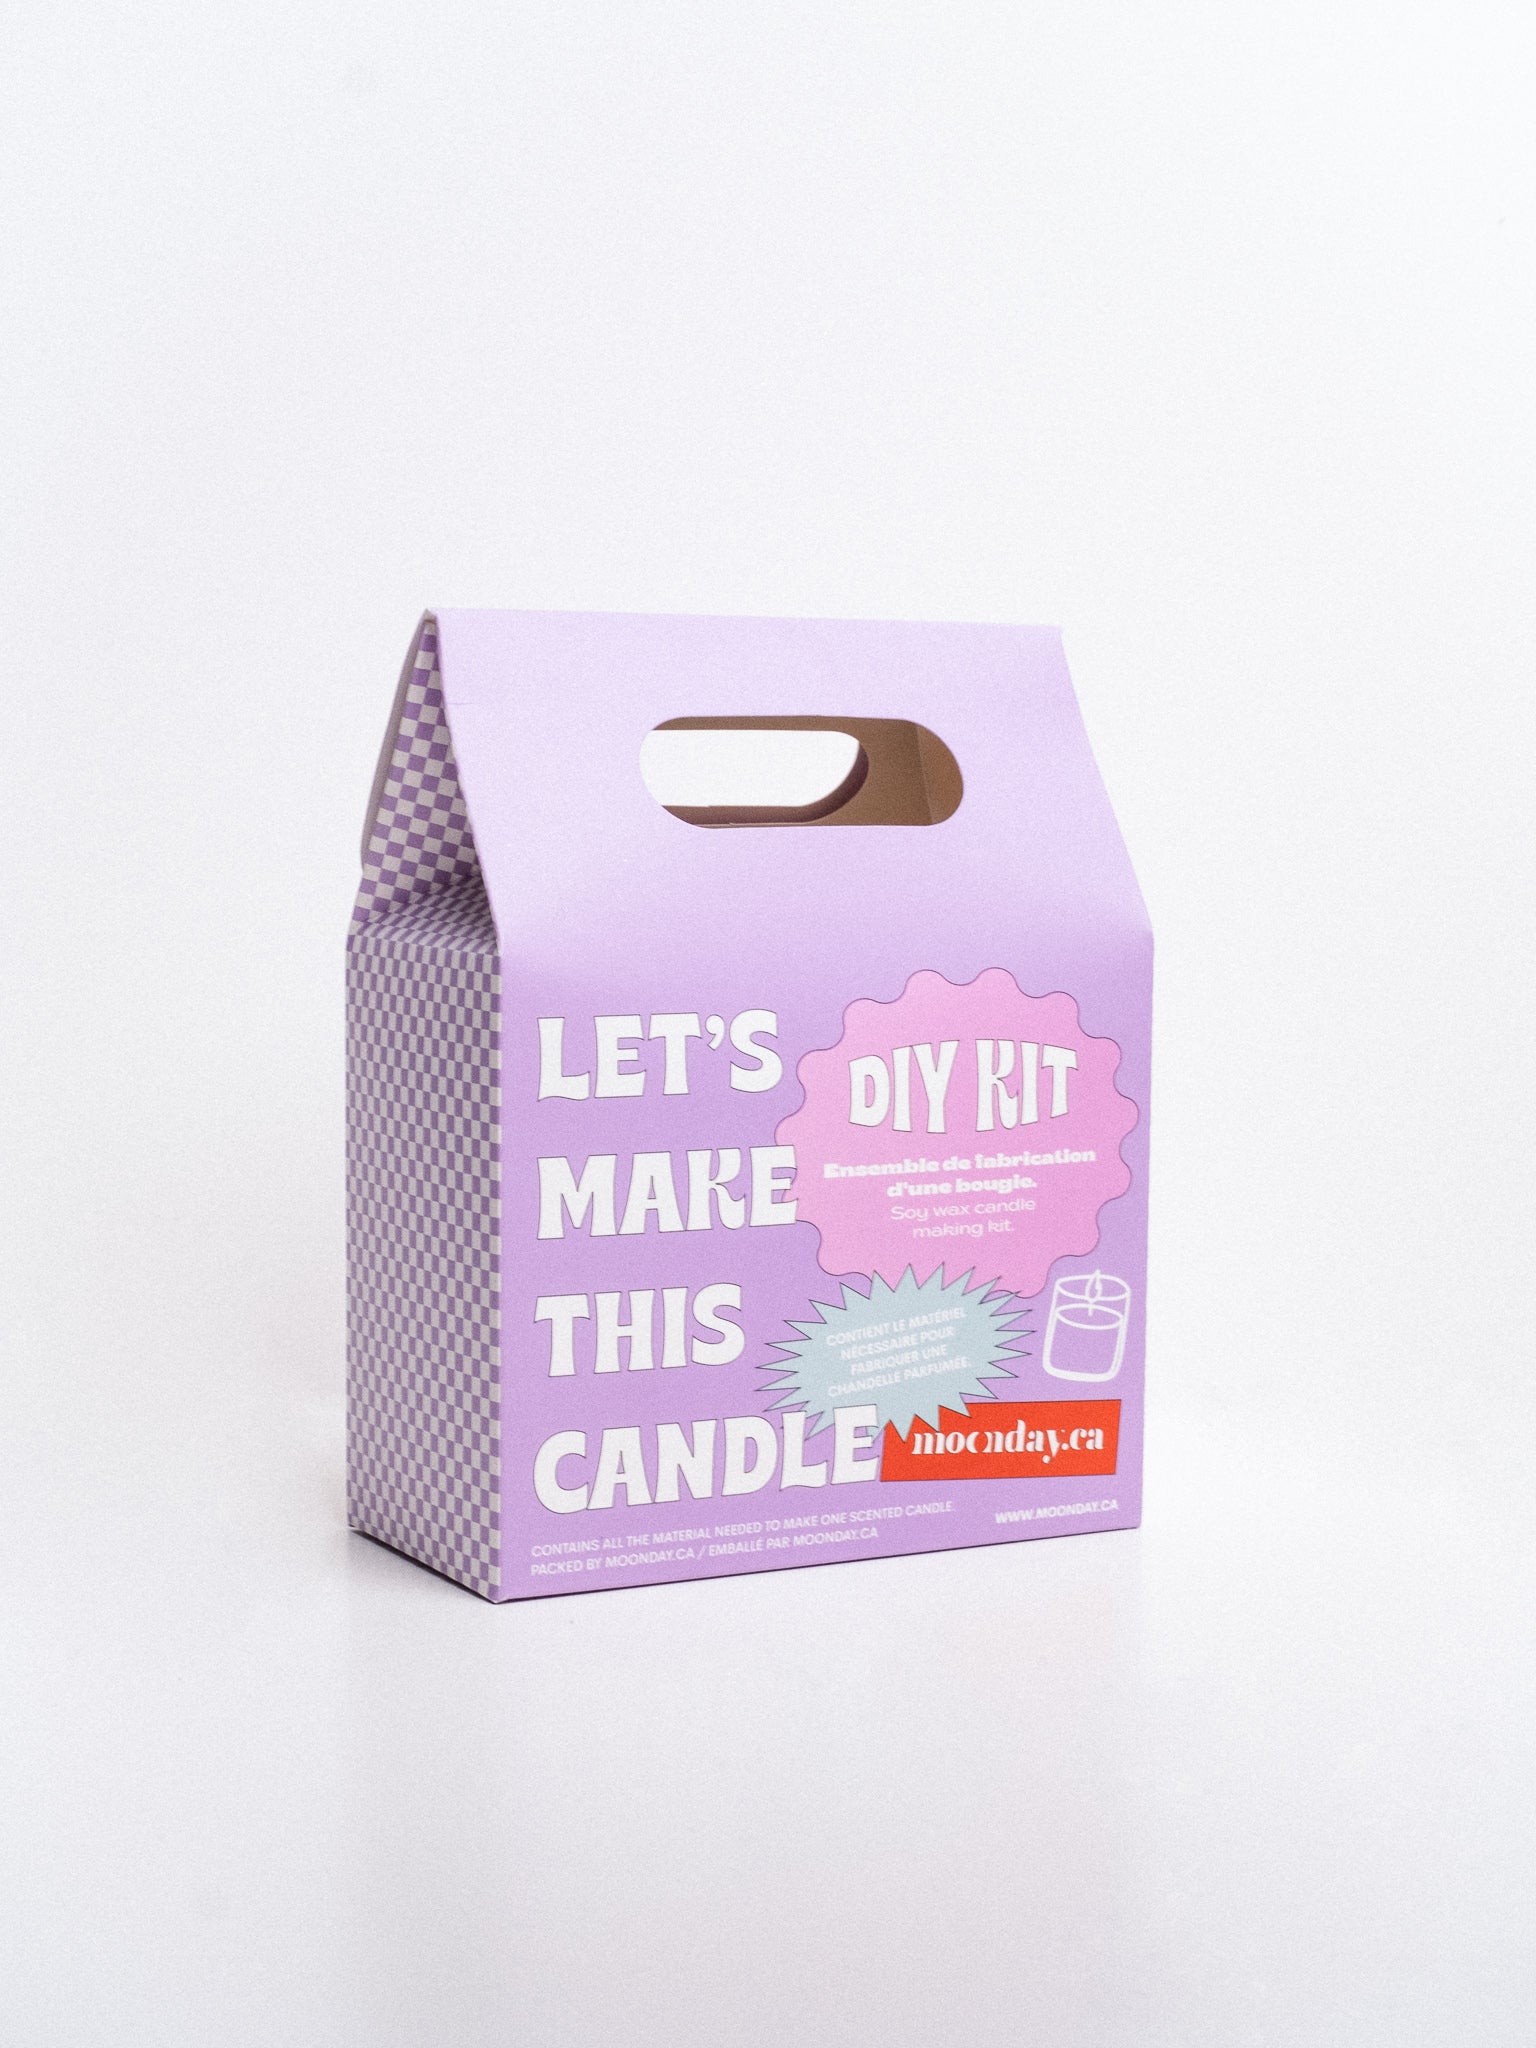 MICROWAVEABLE CANDLE KIT, CANDLE MAKING KIT CANADA